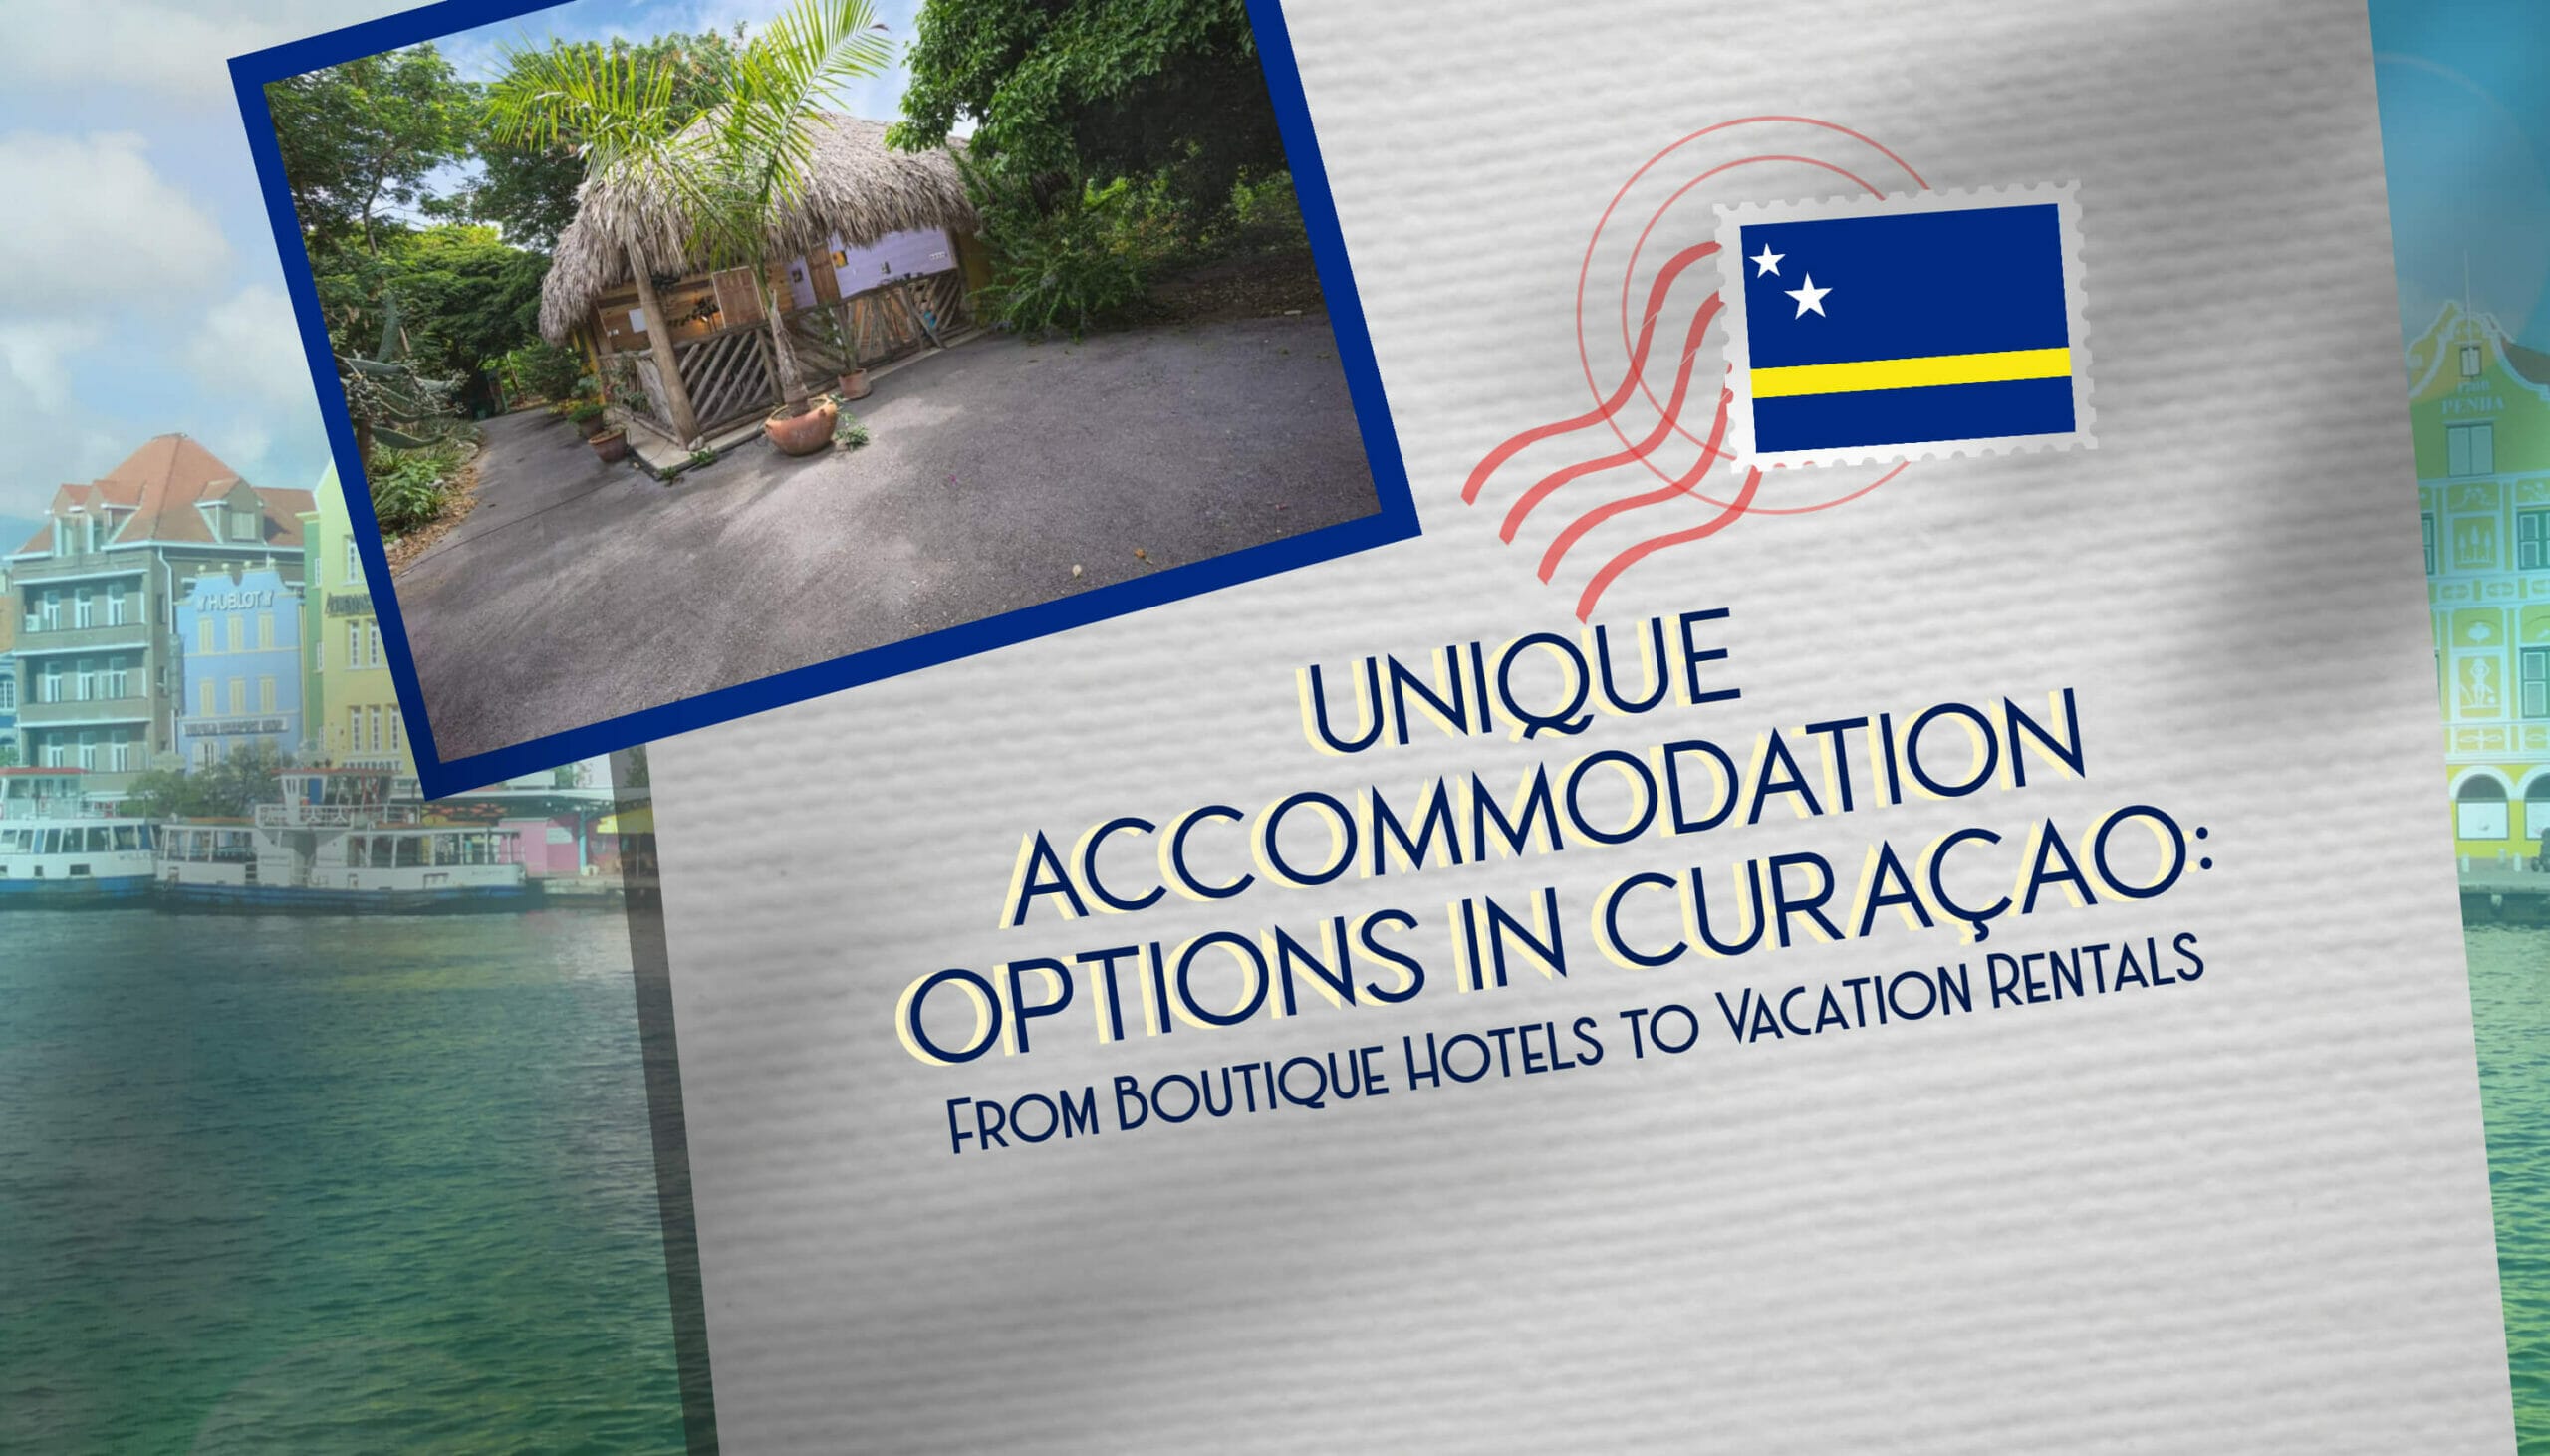 Unique Accommodation Options in Curaçao From Boutique Hotels to Vacation Rentals